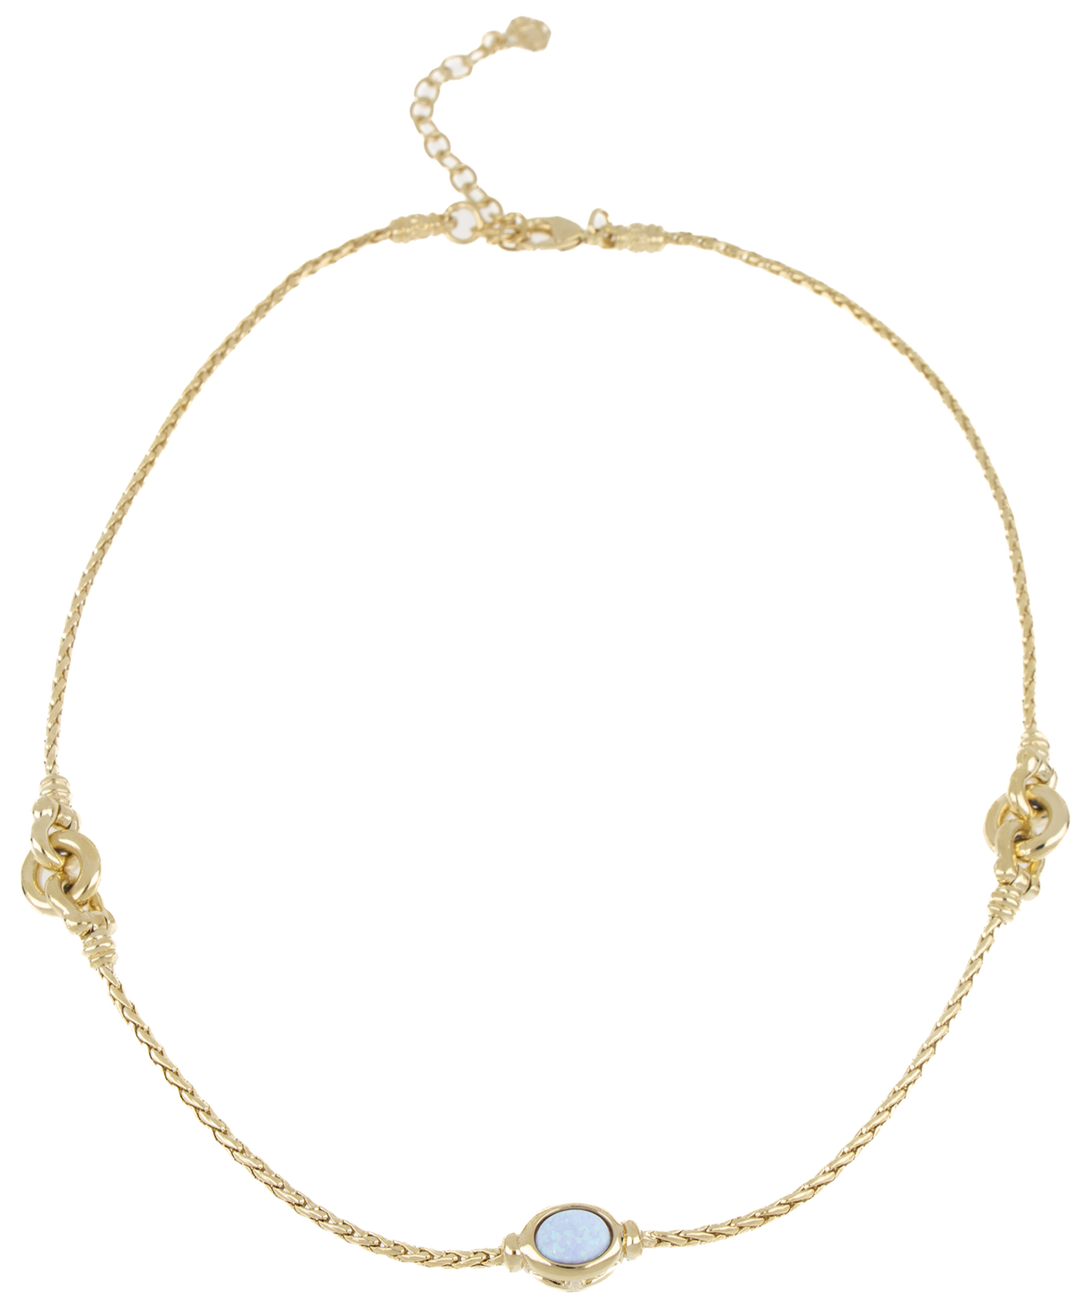 Opalas do Mar Collection - Blue Opal Three Station Gold 16-18” Necklace